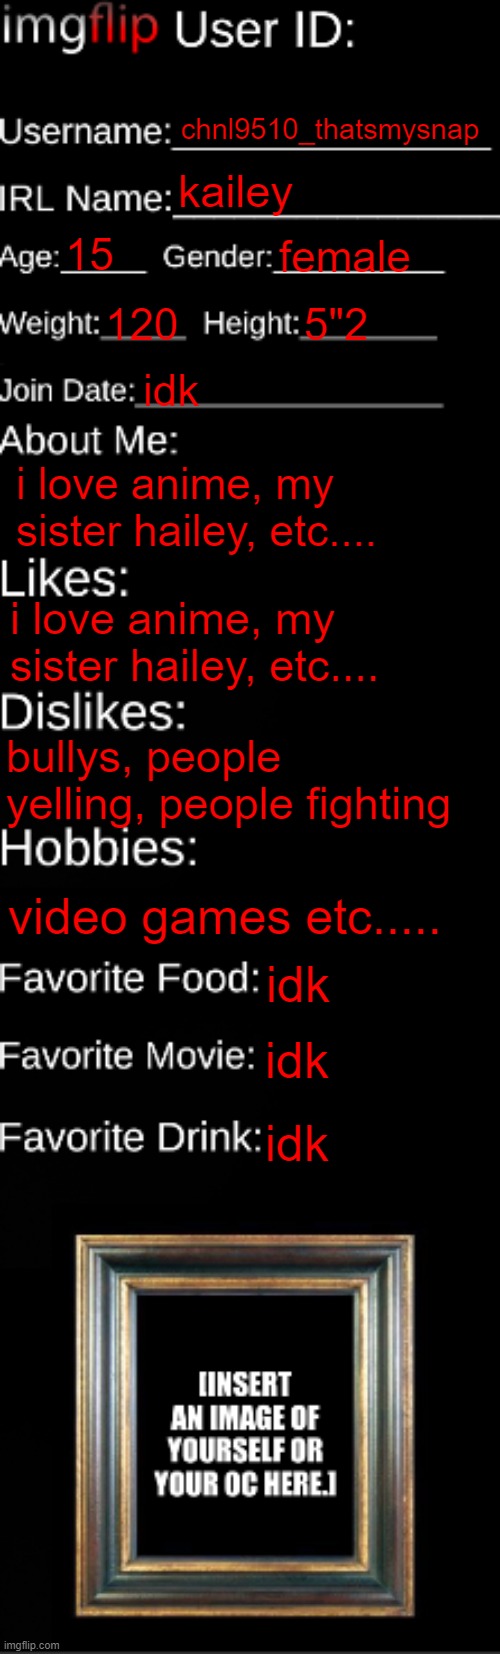 imgflip ID Card | chnl9510_thatsmysnap; kailey; 15; female; 120; 5"2; idk; i love anime, my sister hailey, etc.... i love anime, my sister hailey, etc.... bullys, people yelling, people fighting; video games etc..... idk; idk; idk | image tagged in imgflip id card | made w/ Imgflip meme maker